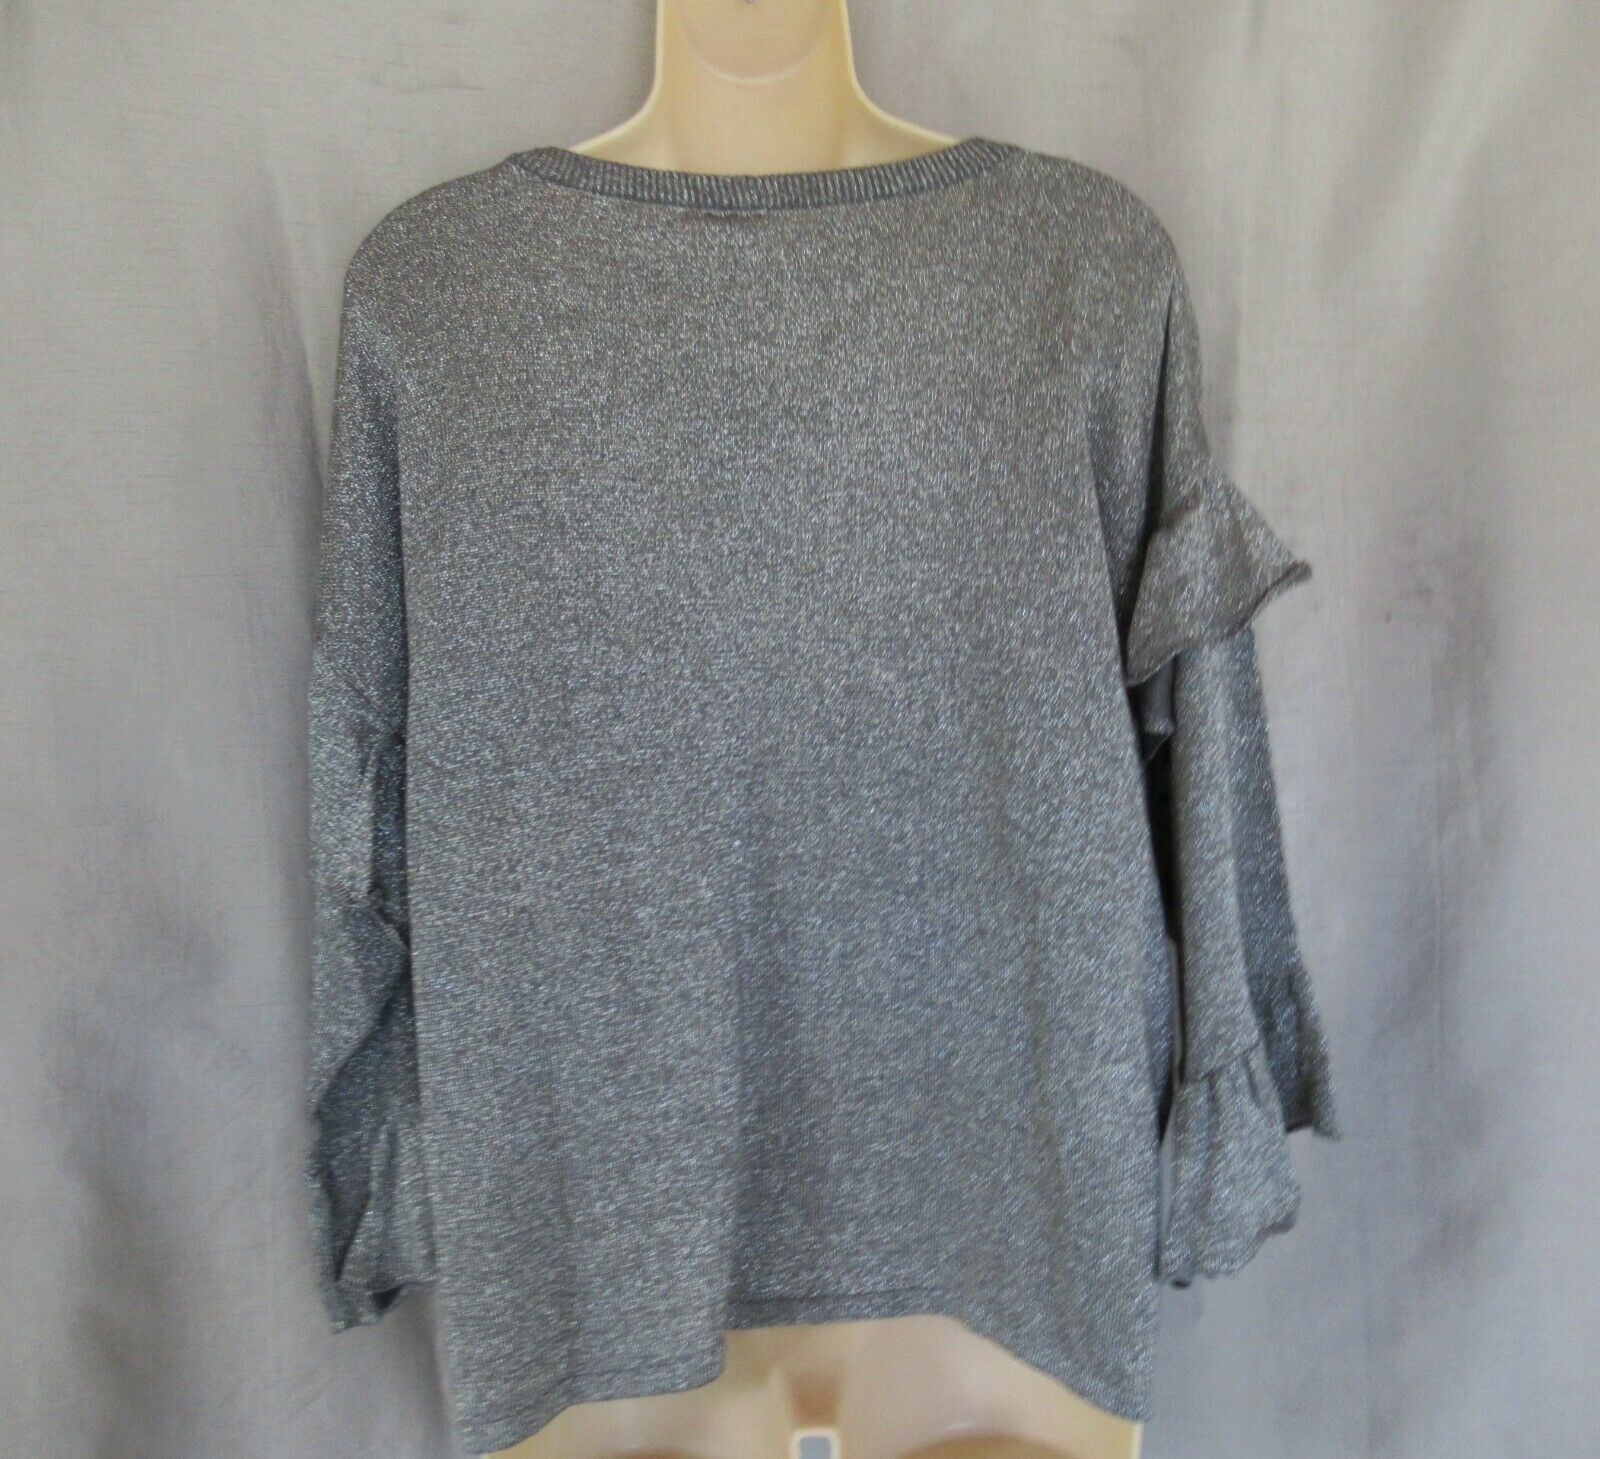 Moon & Madison sweater top L gray silver metallic ruffled bell sleeves ...